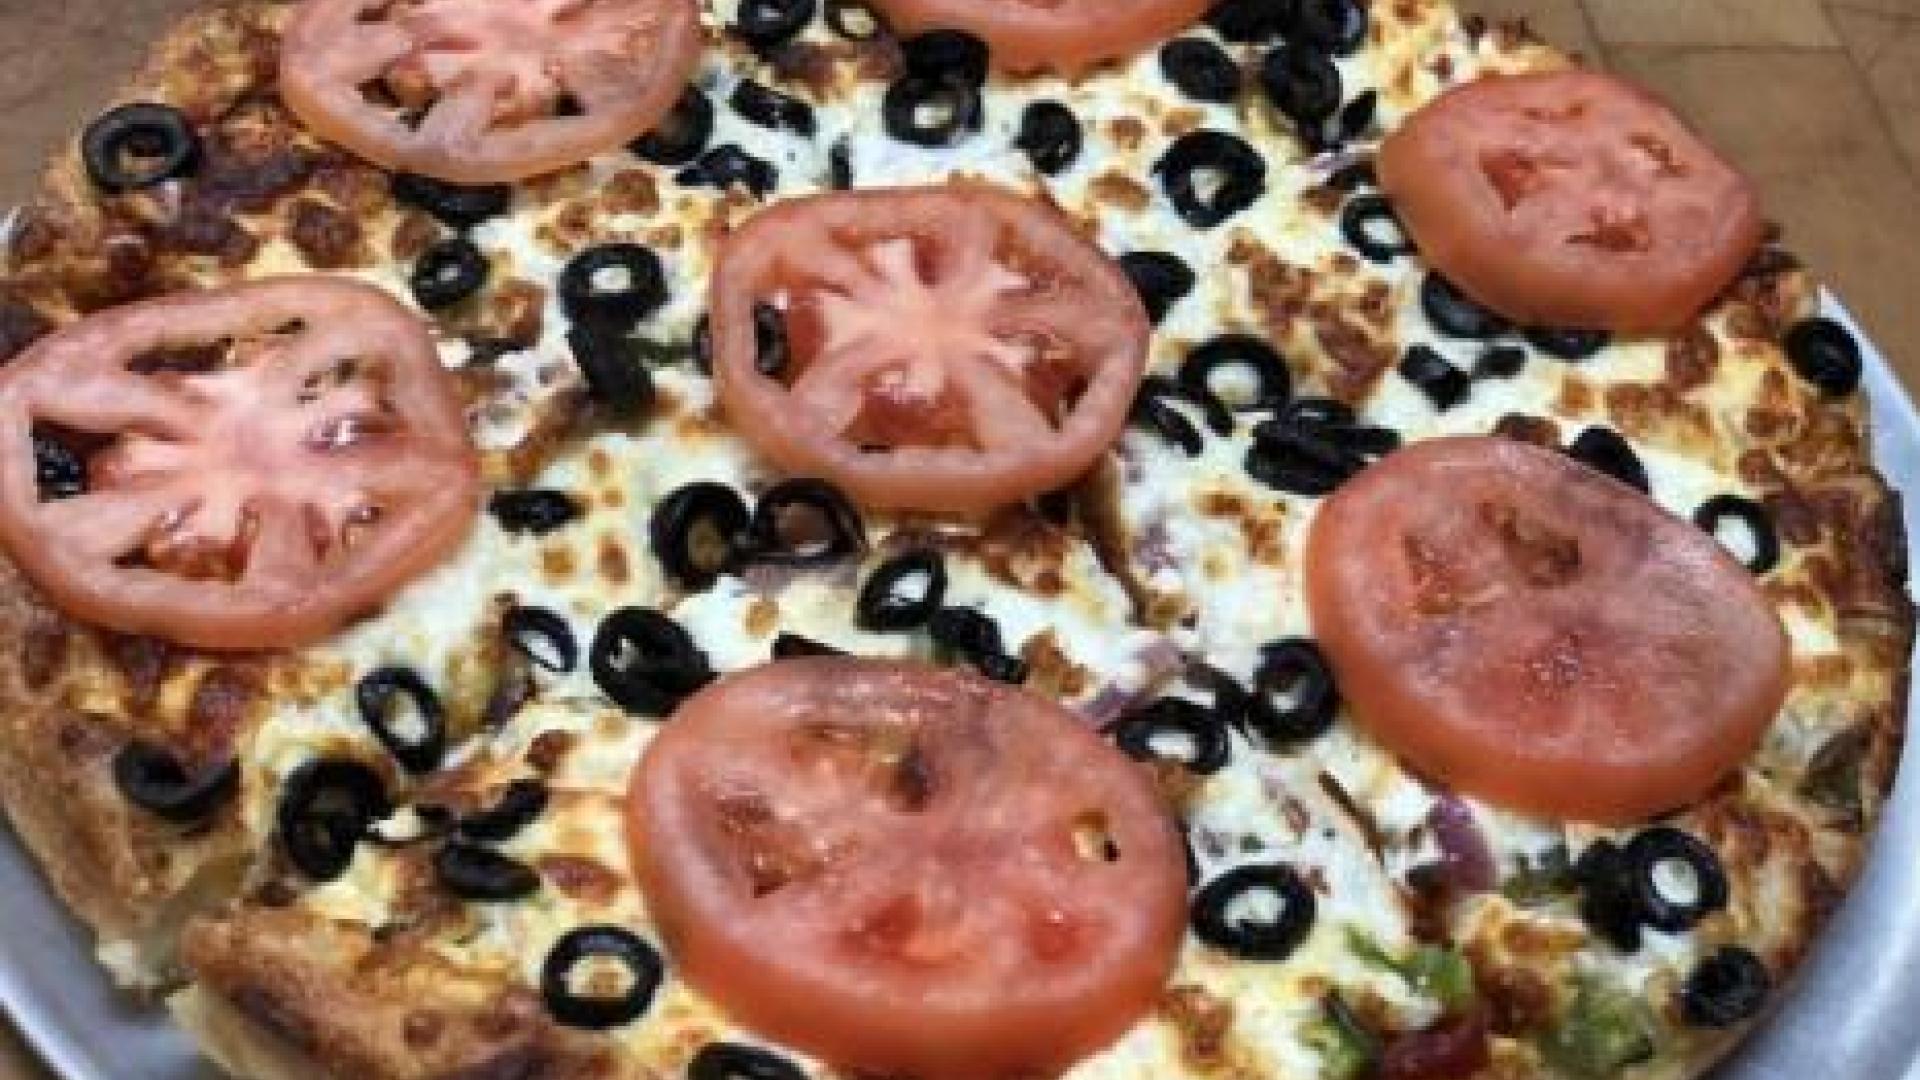 Pizza with sliced tomatoes and olives.